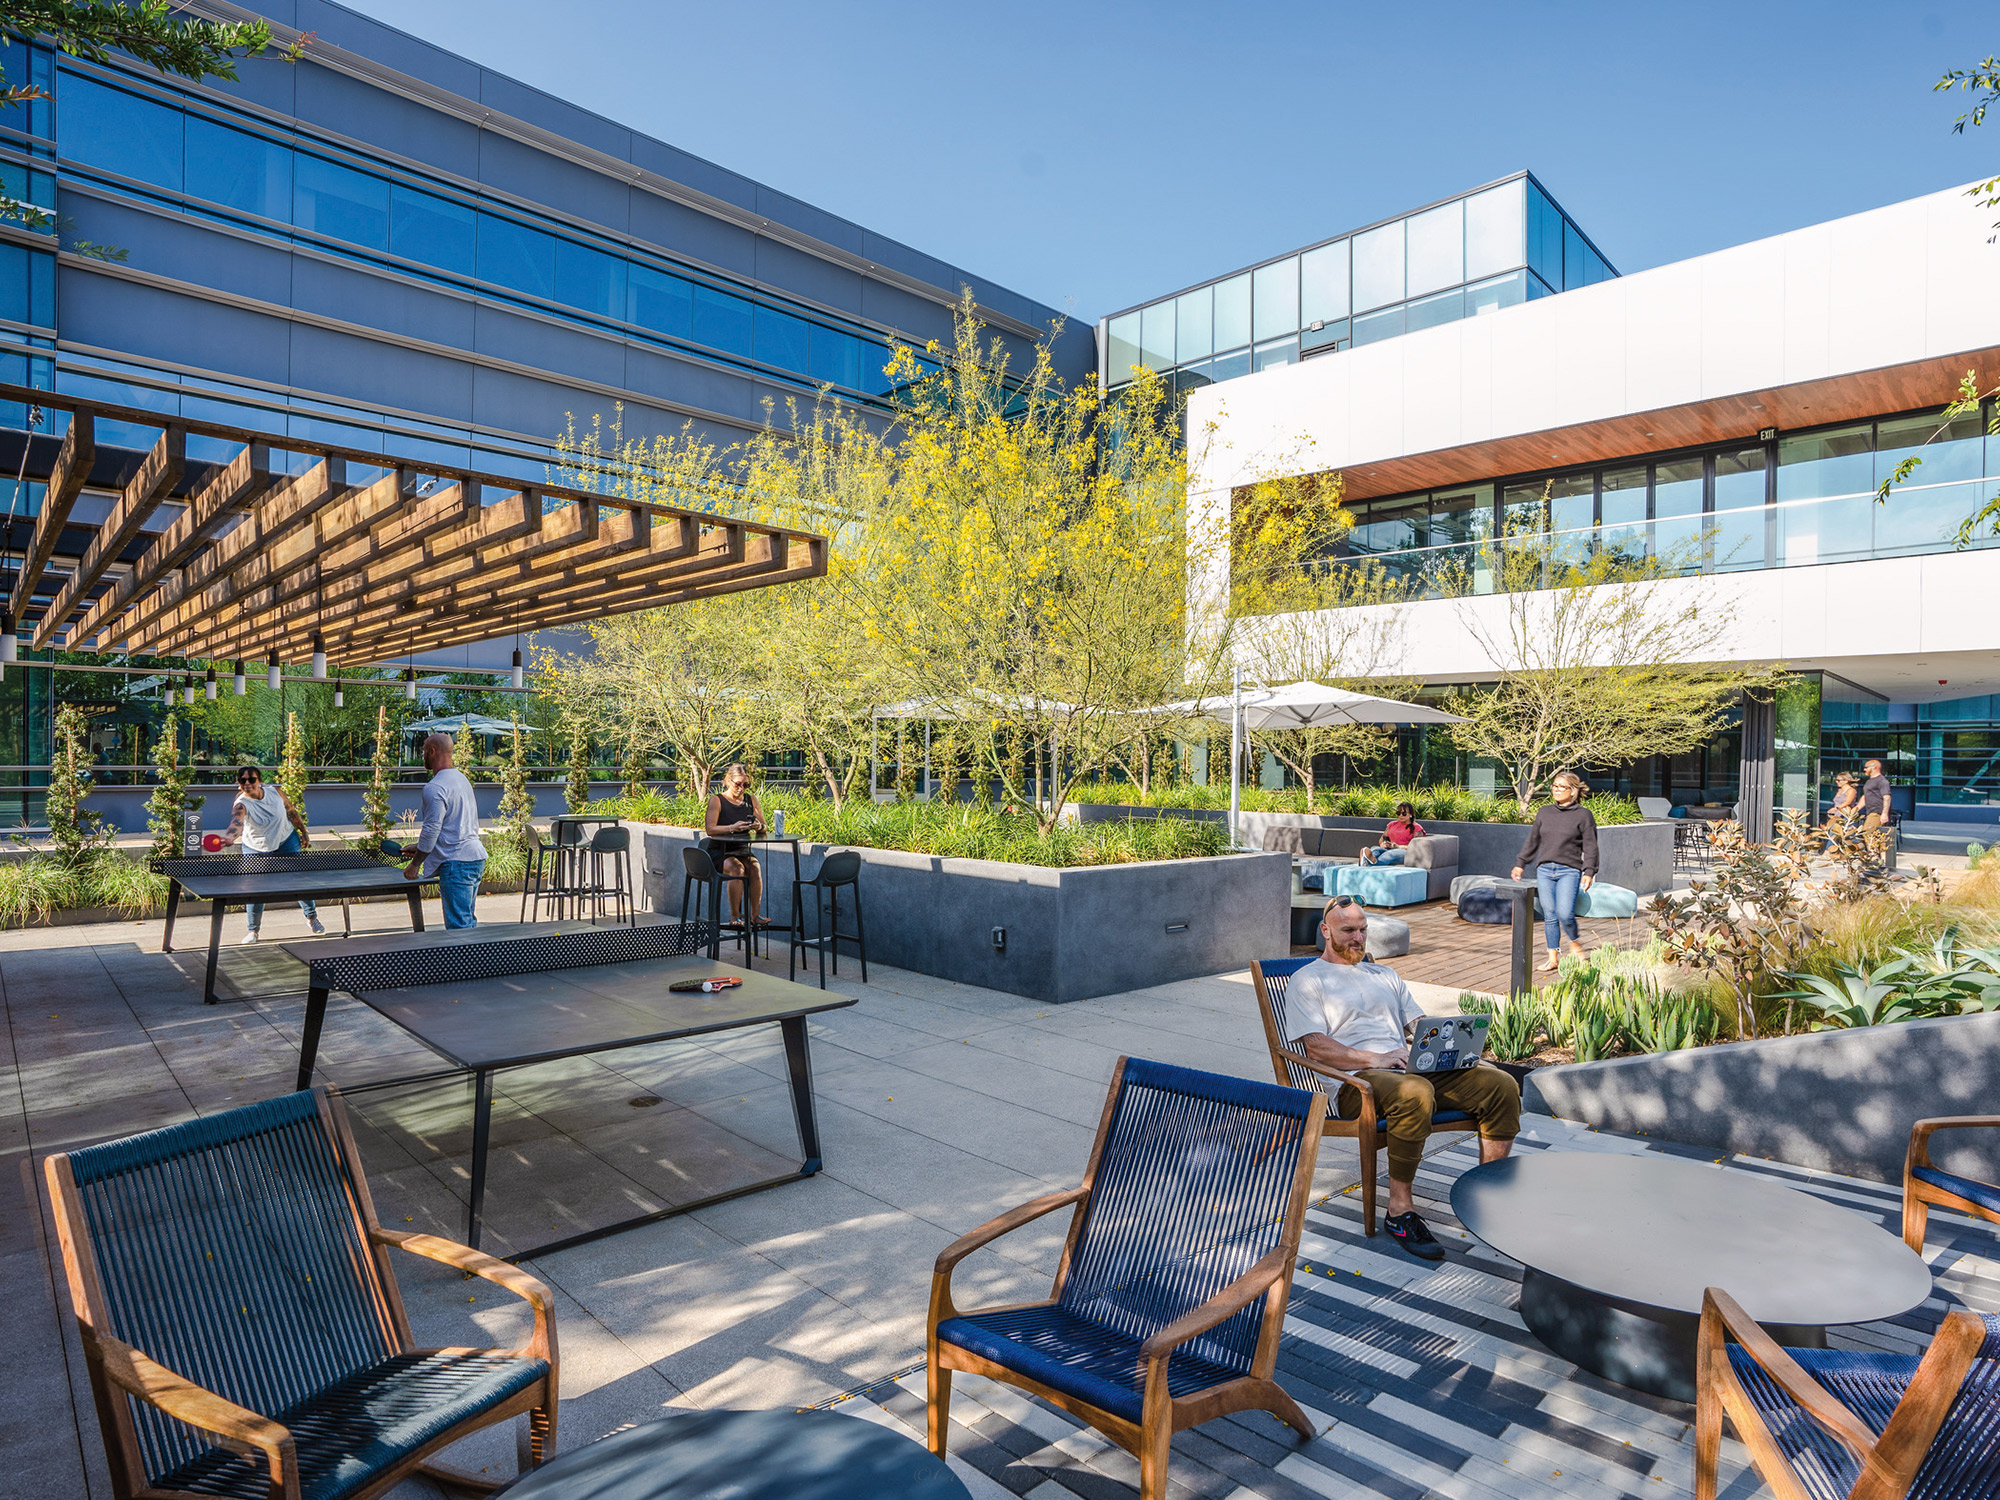 Employees enjoying a sunny break in a modern office courtyard with comfortable seating and lush greenery.